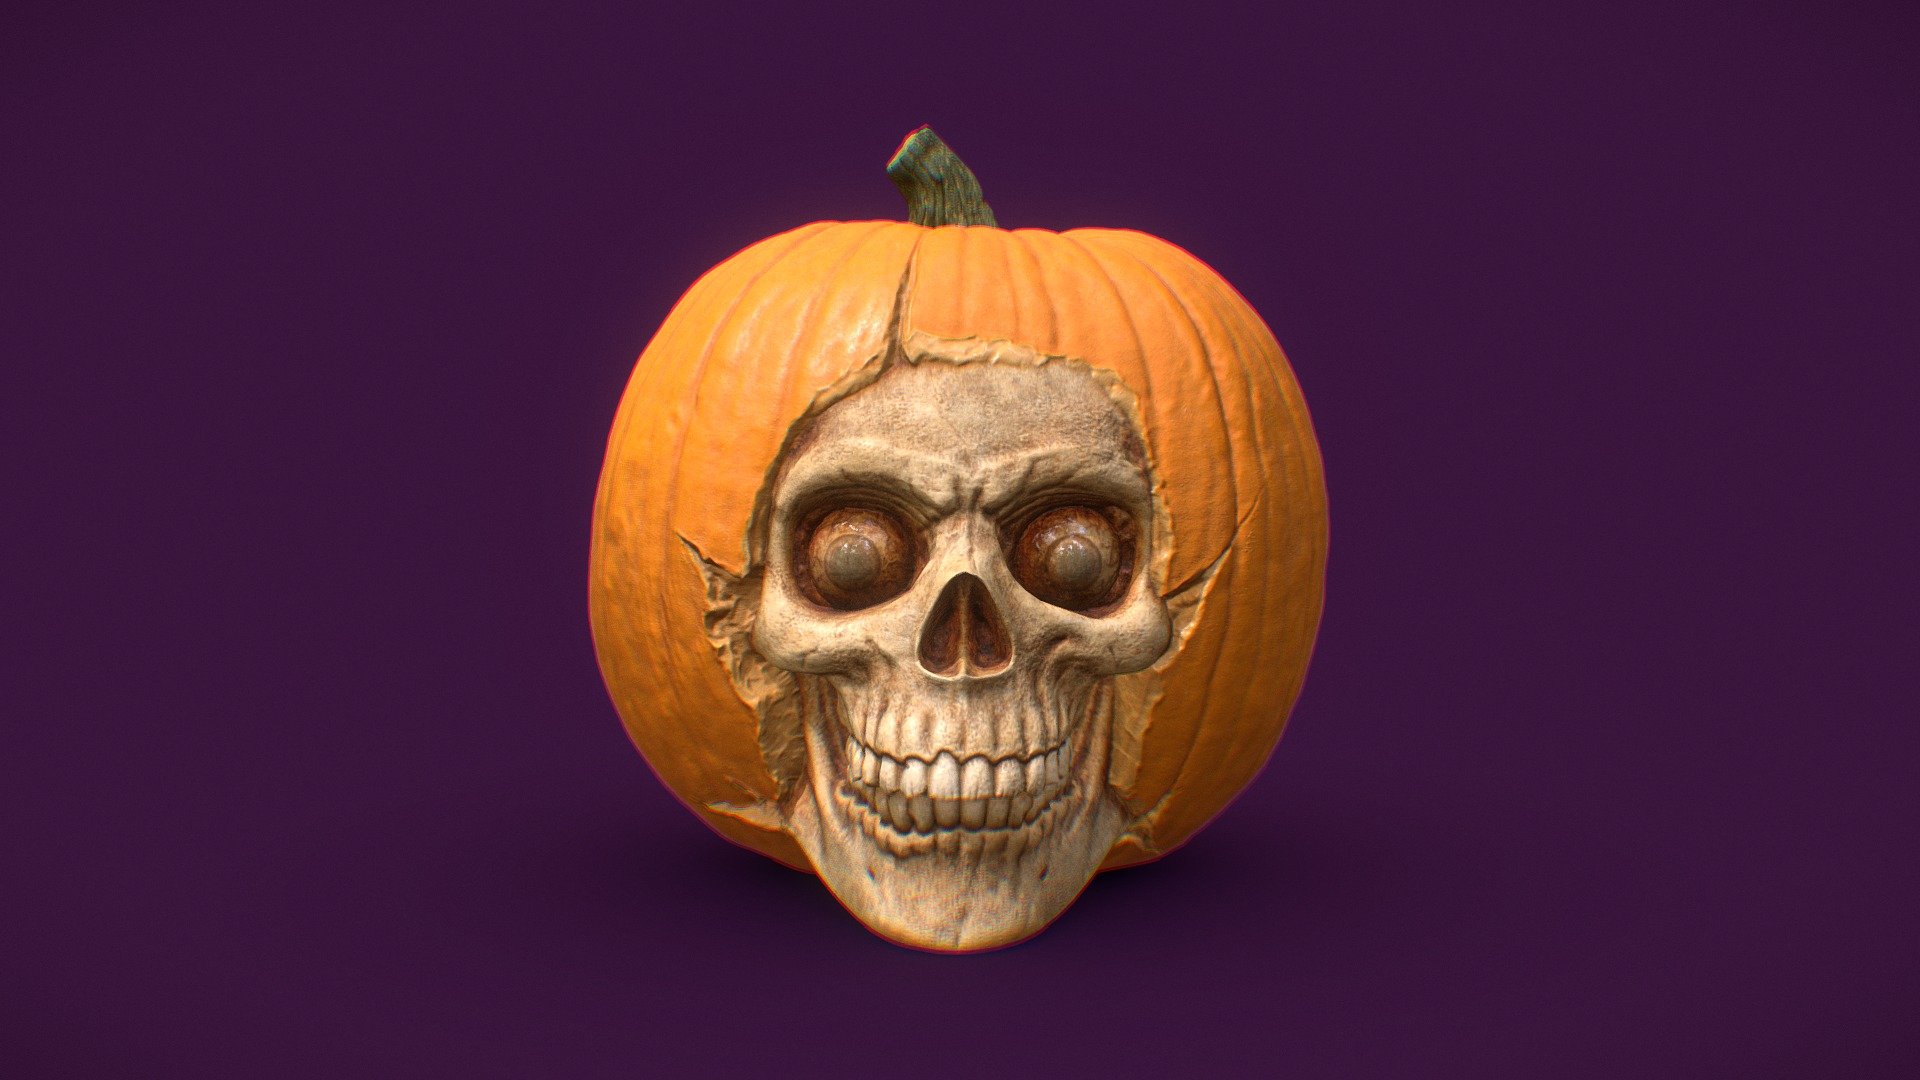 Add some fun, light-hearted, creepiness to your festive autumn scene with this pumpkin skull. All quad geometry 3d model